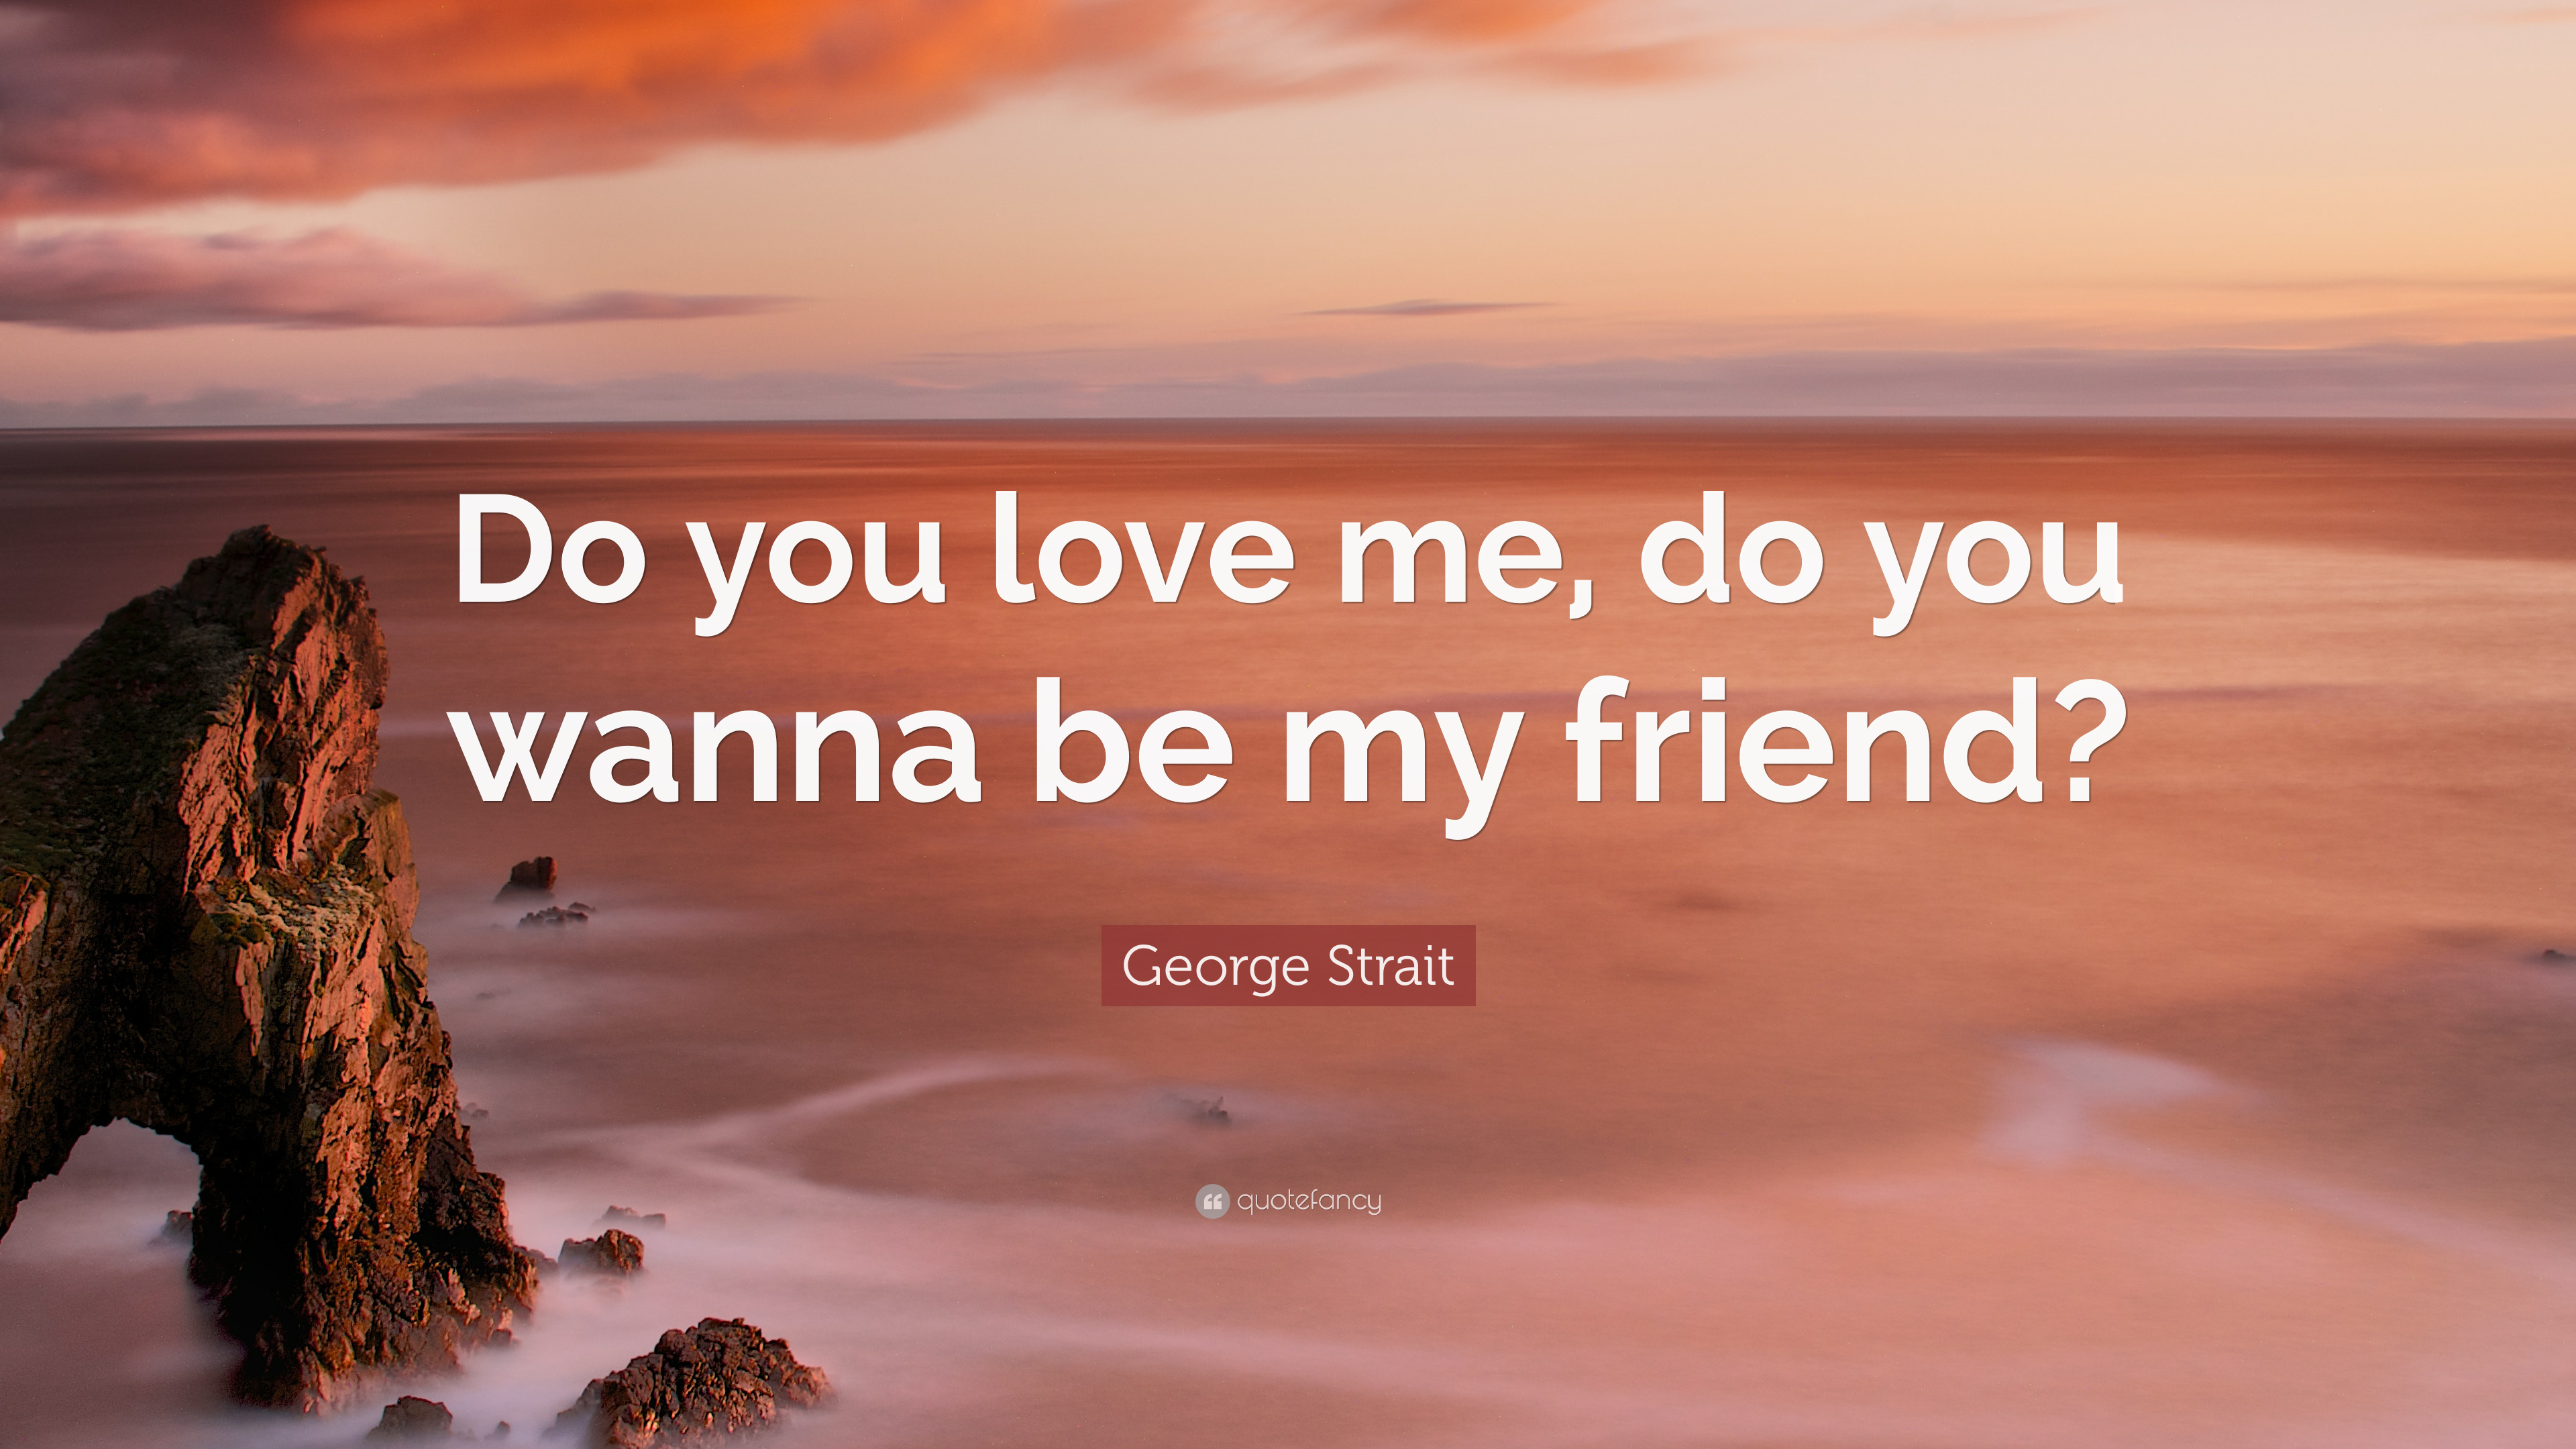 George Strait Quote: “Do you love me, do you wanna be my friend?” 7